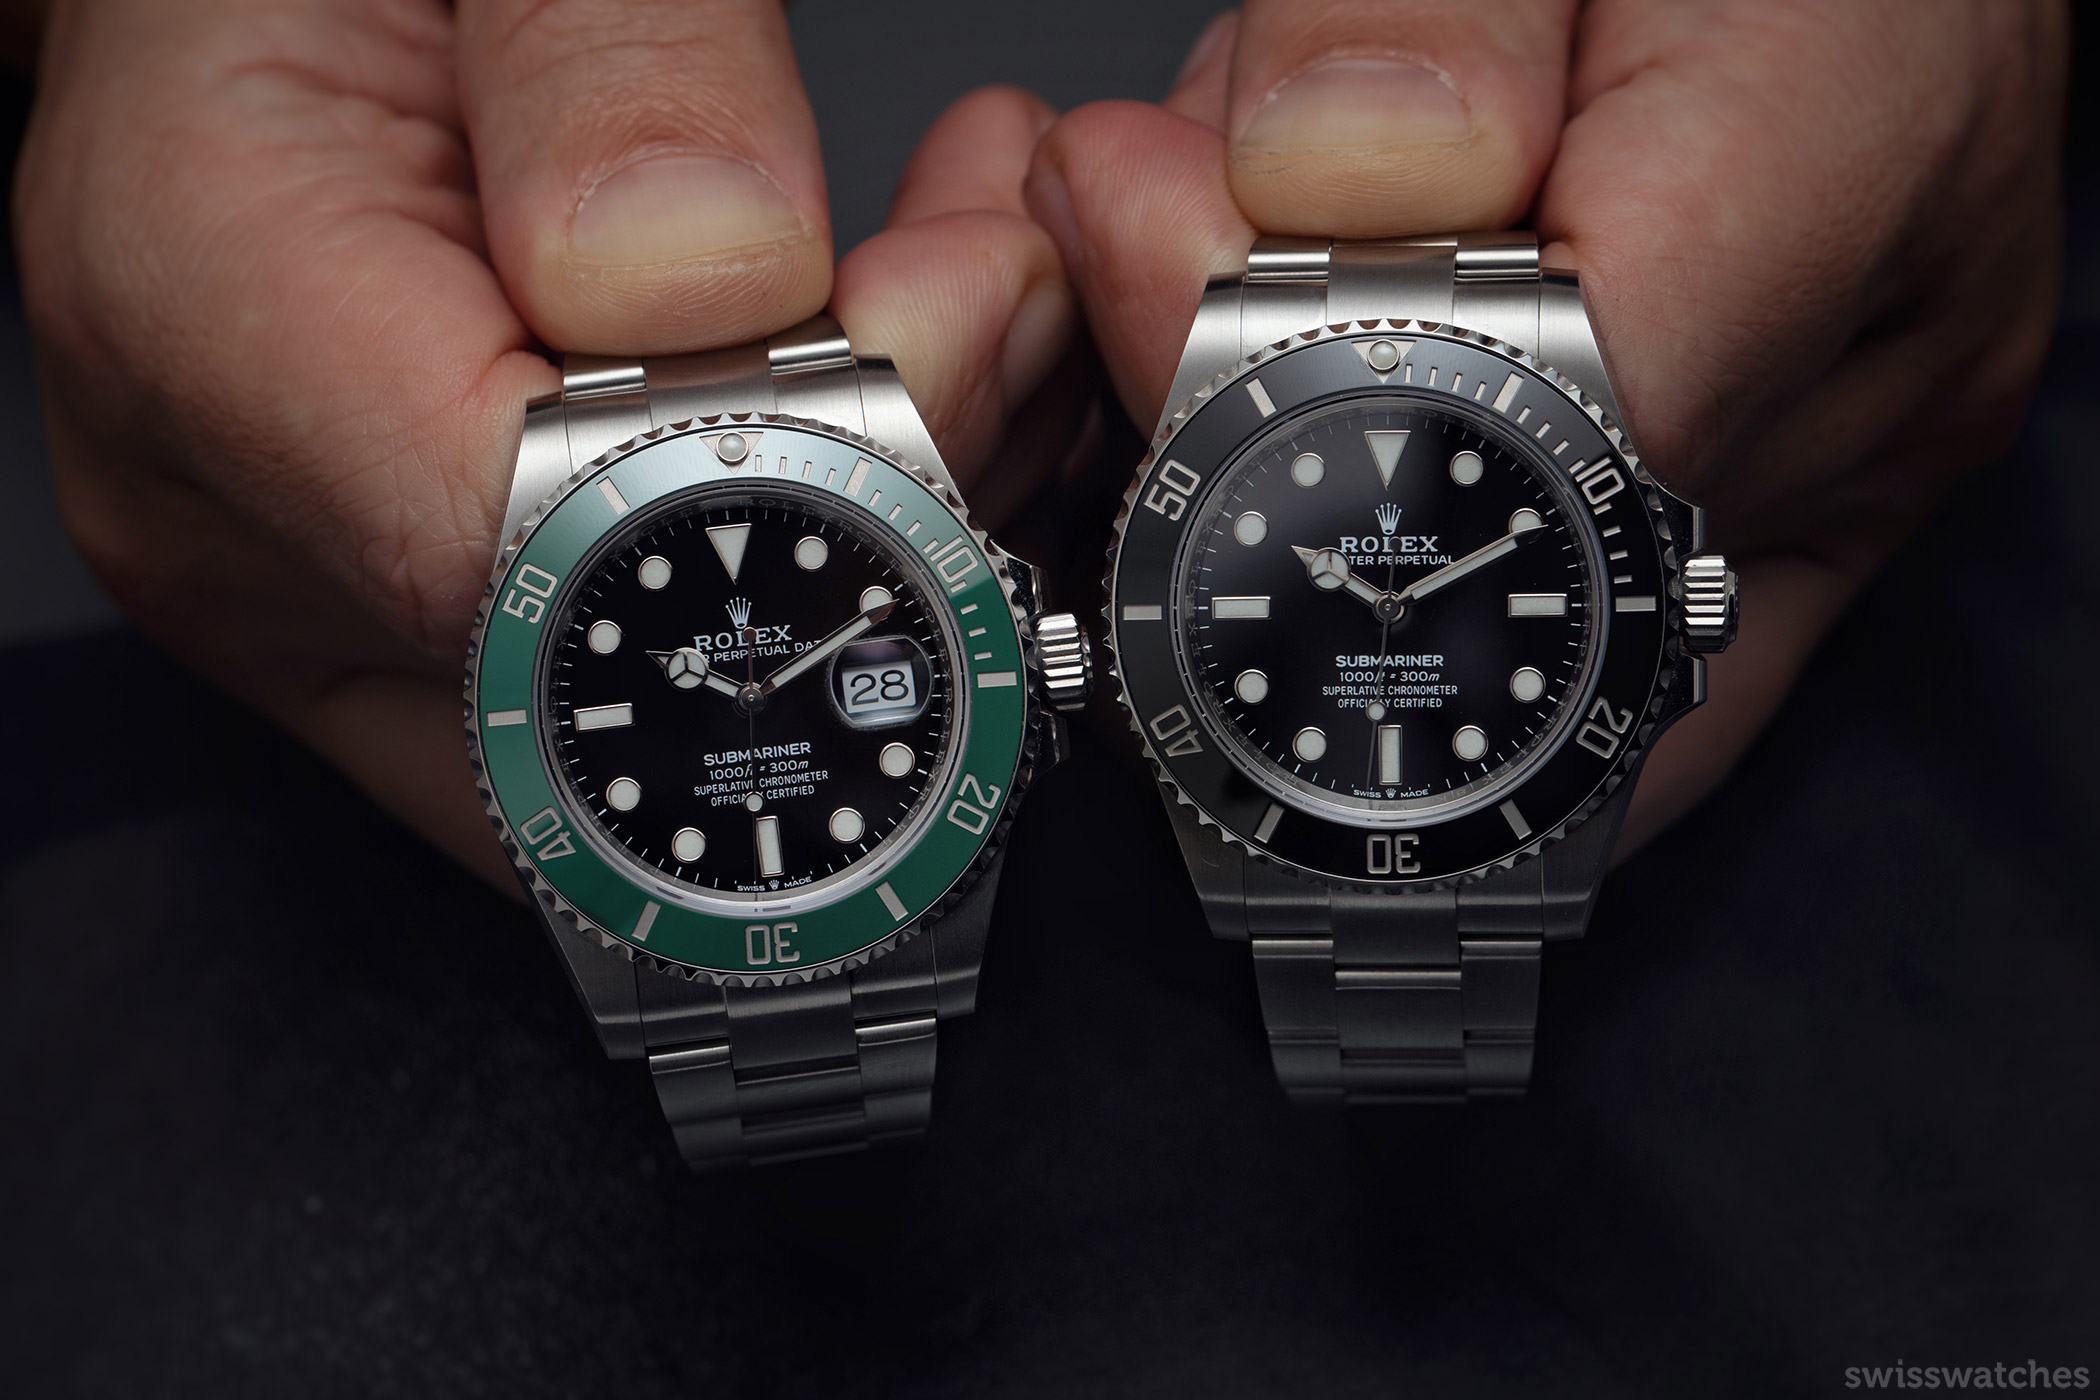 lyse Vie angre Rolex Submariner: Date or No Date – The Ultimate Question | Swisswatches